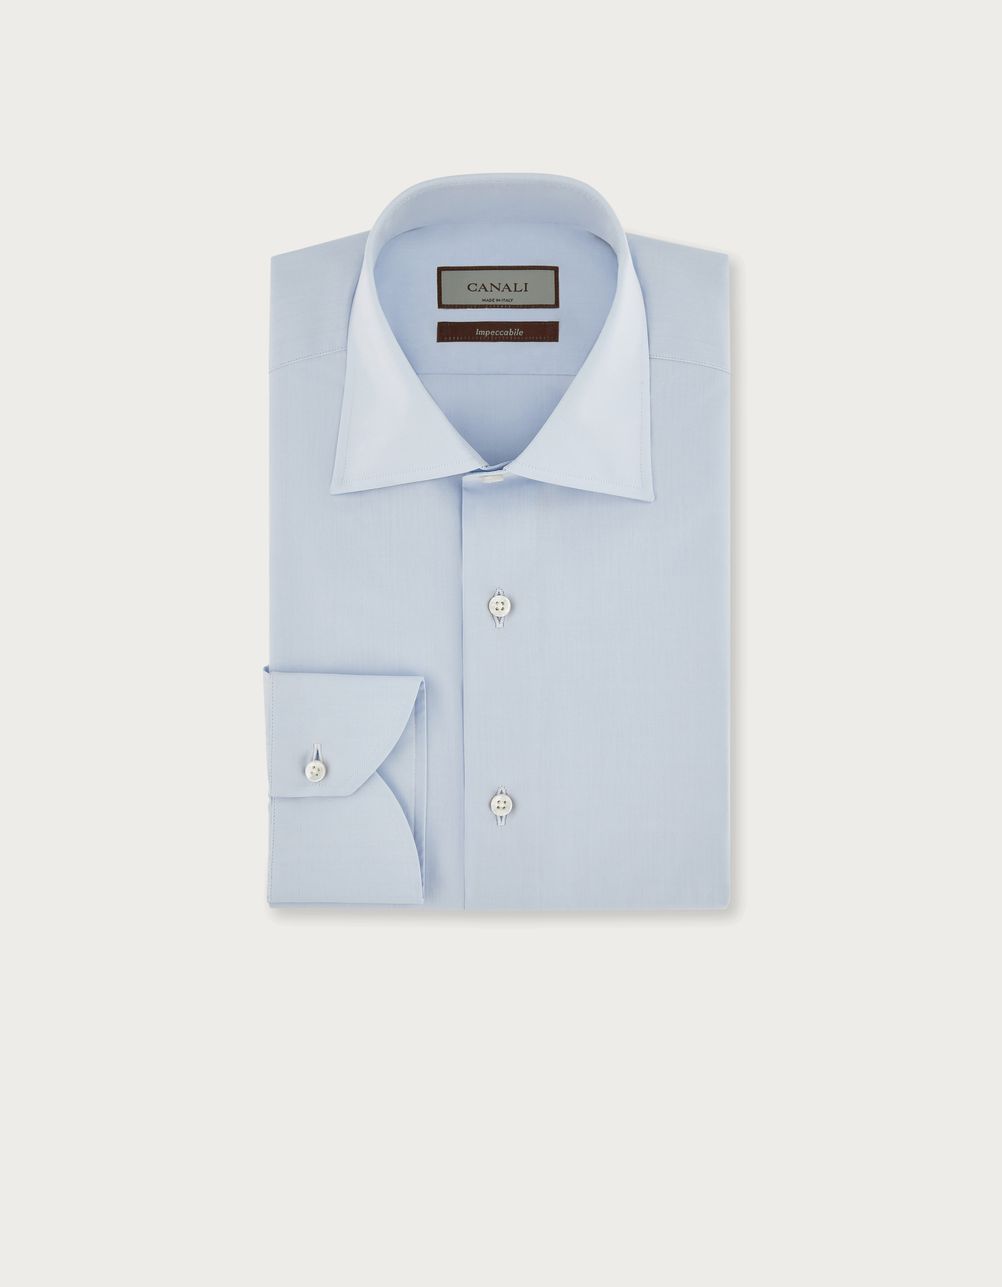 Modern fit shirt in light blue cotton - Exclusive